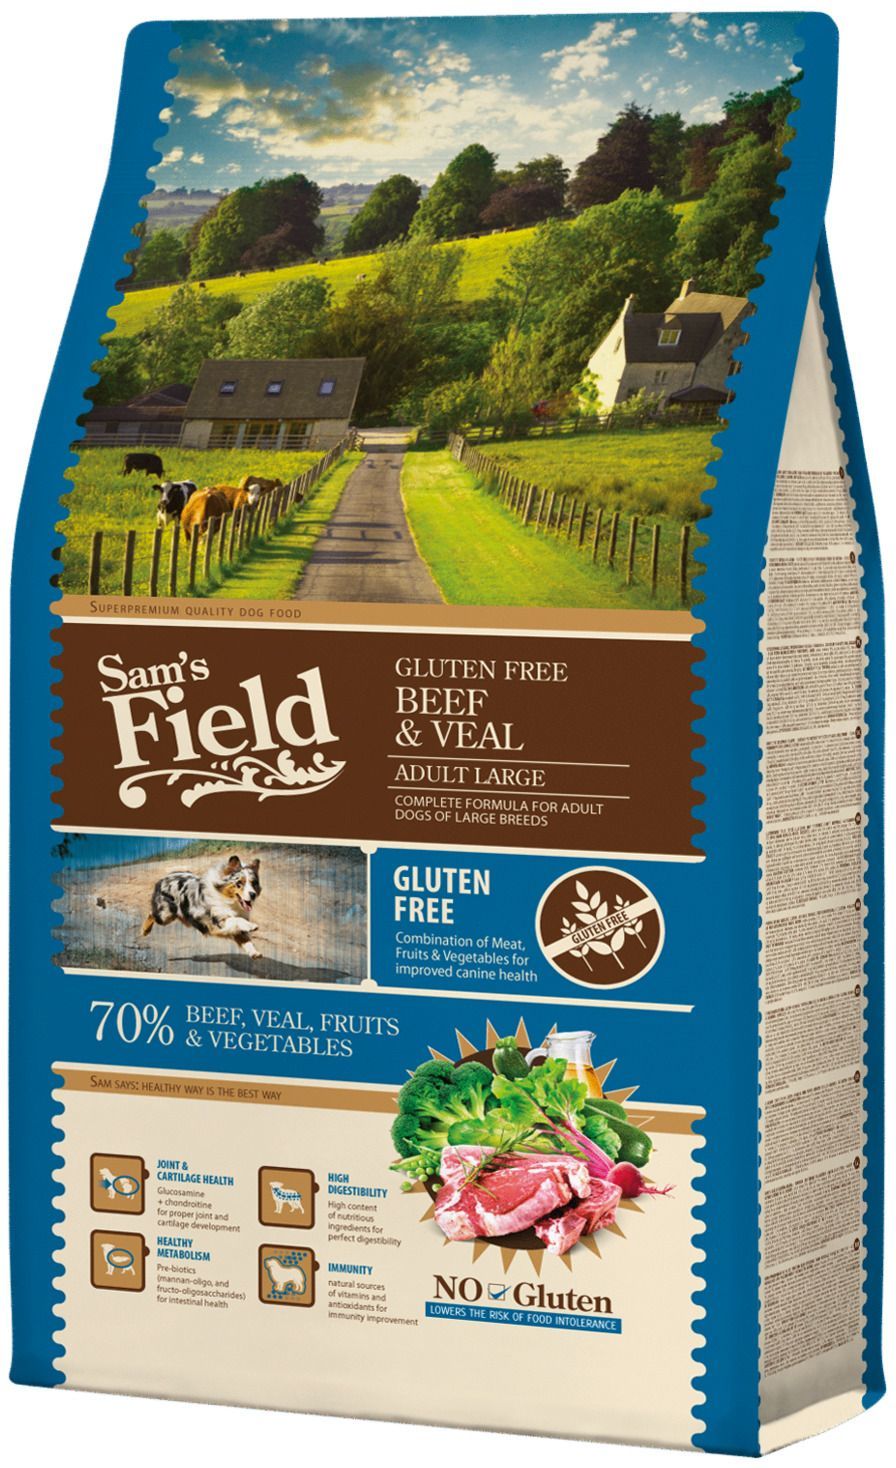 Sam's Field Gluten Free Adult Large Beef & Veal - zoom